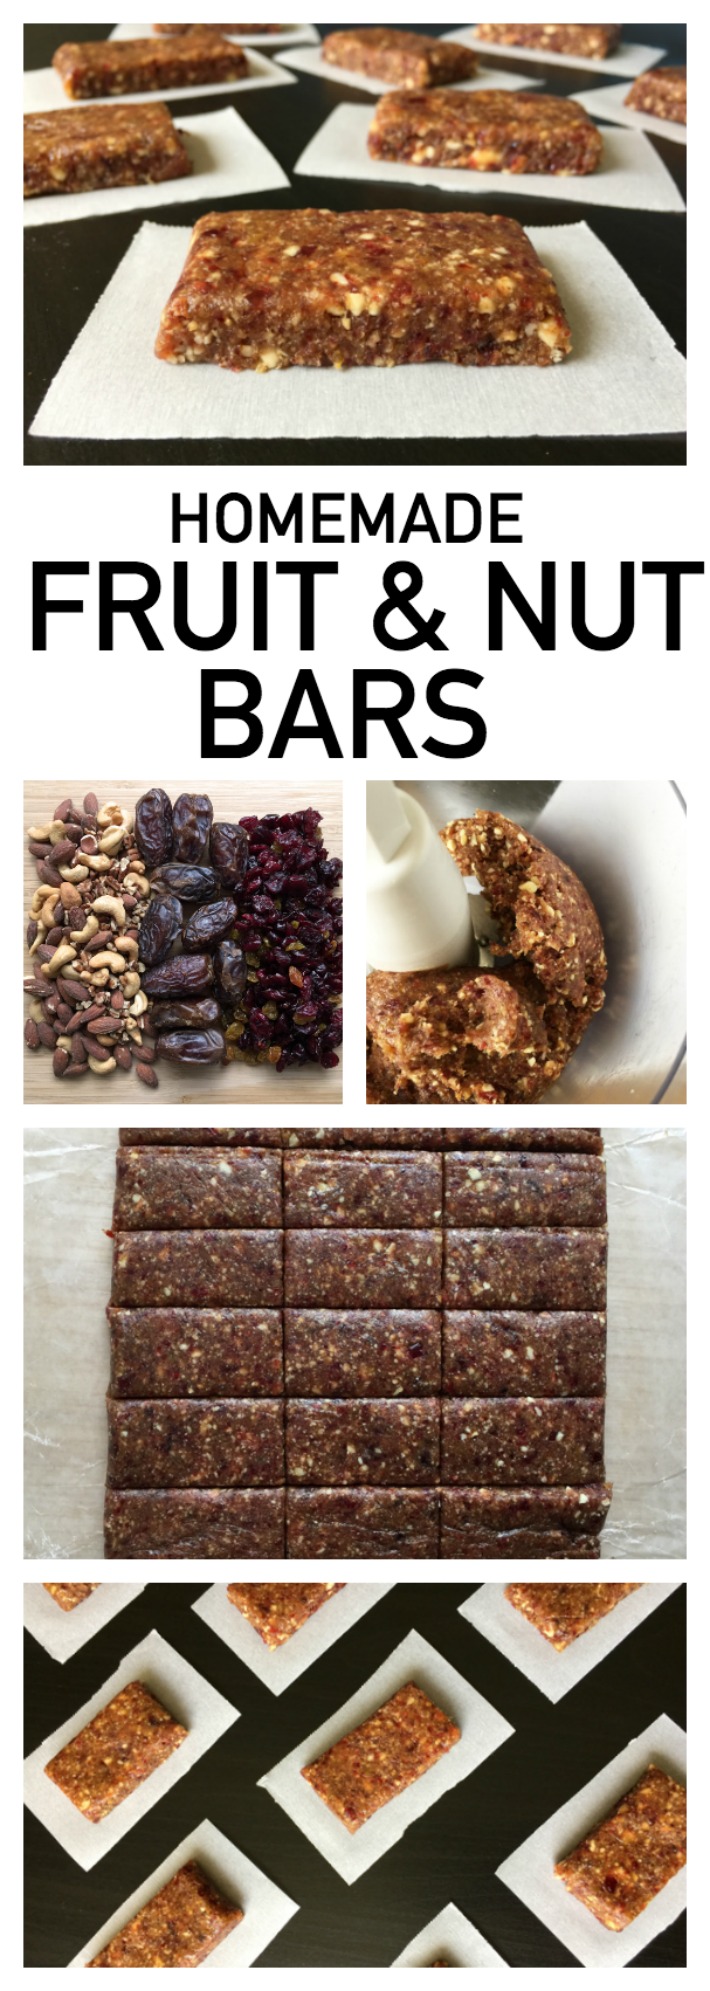 These homemade fruit and nut bars are WAY better than store-bought granola bars! Plus, all you need is three ingredients and a food processor.